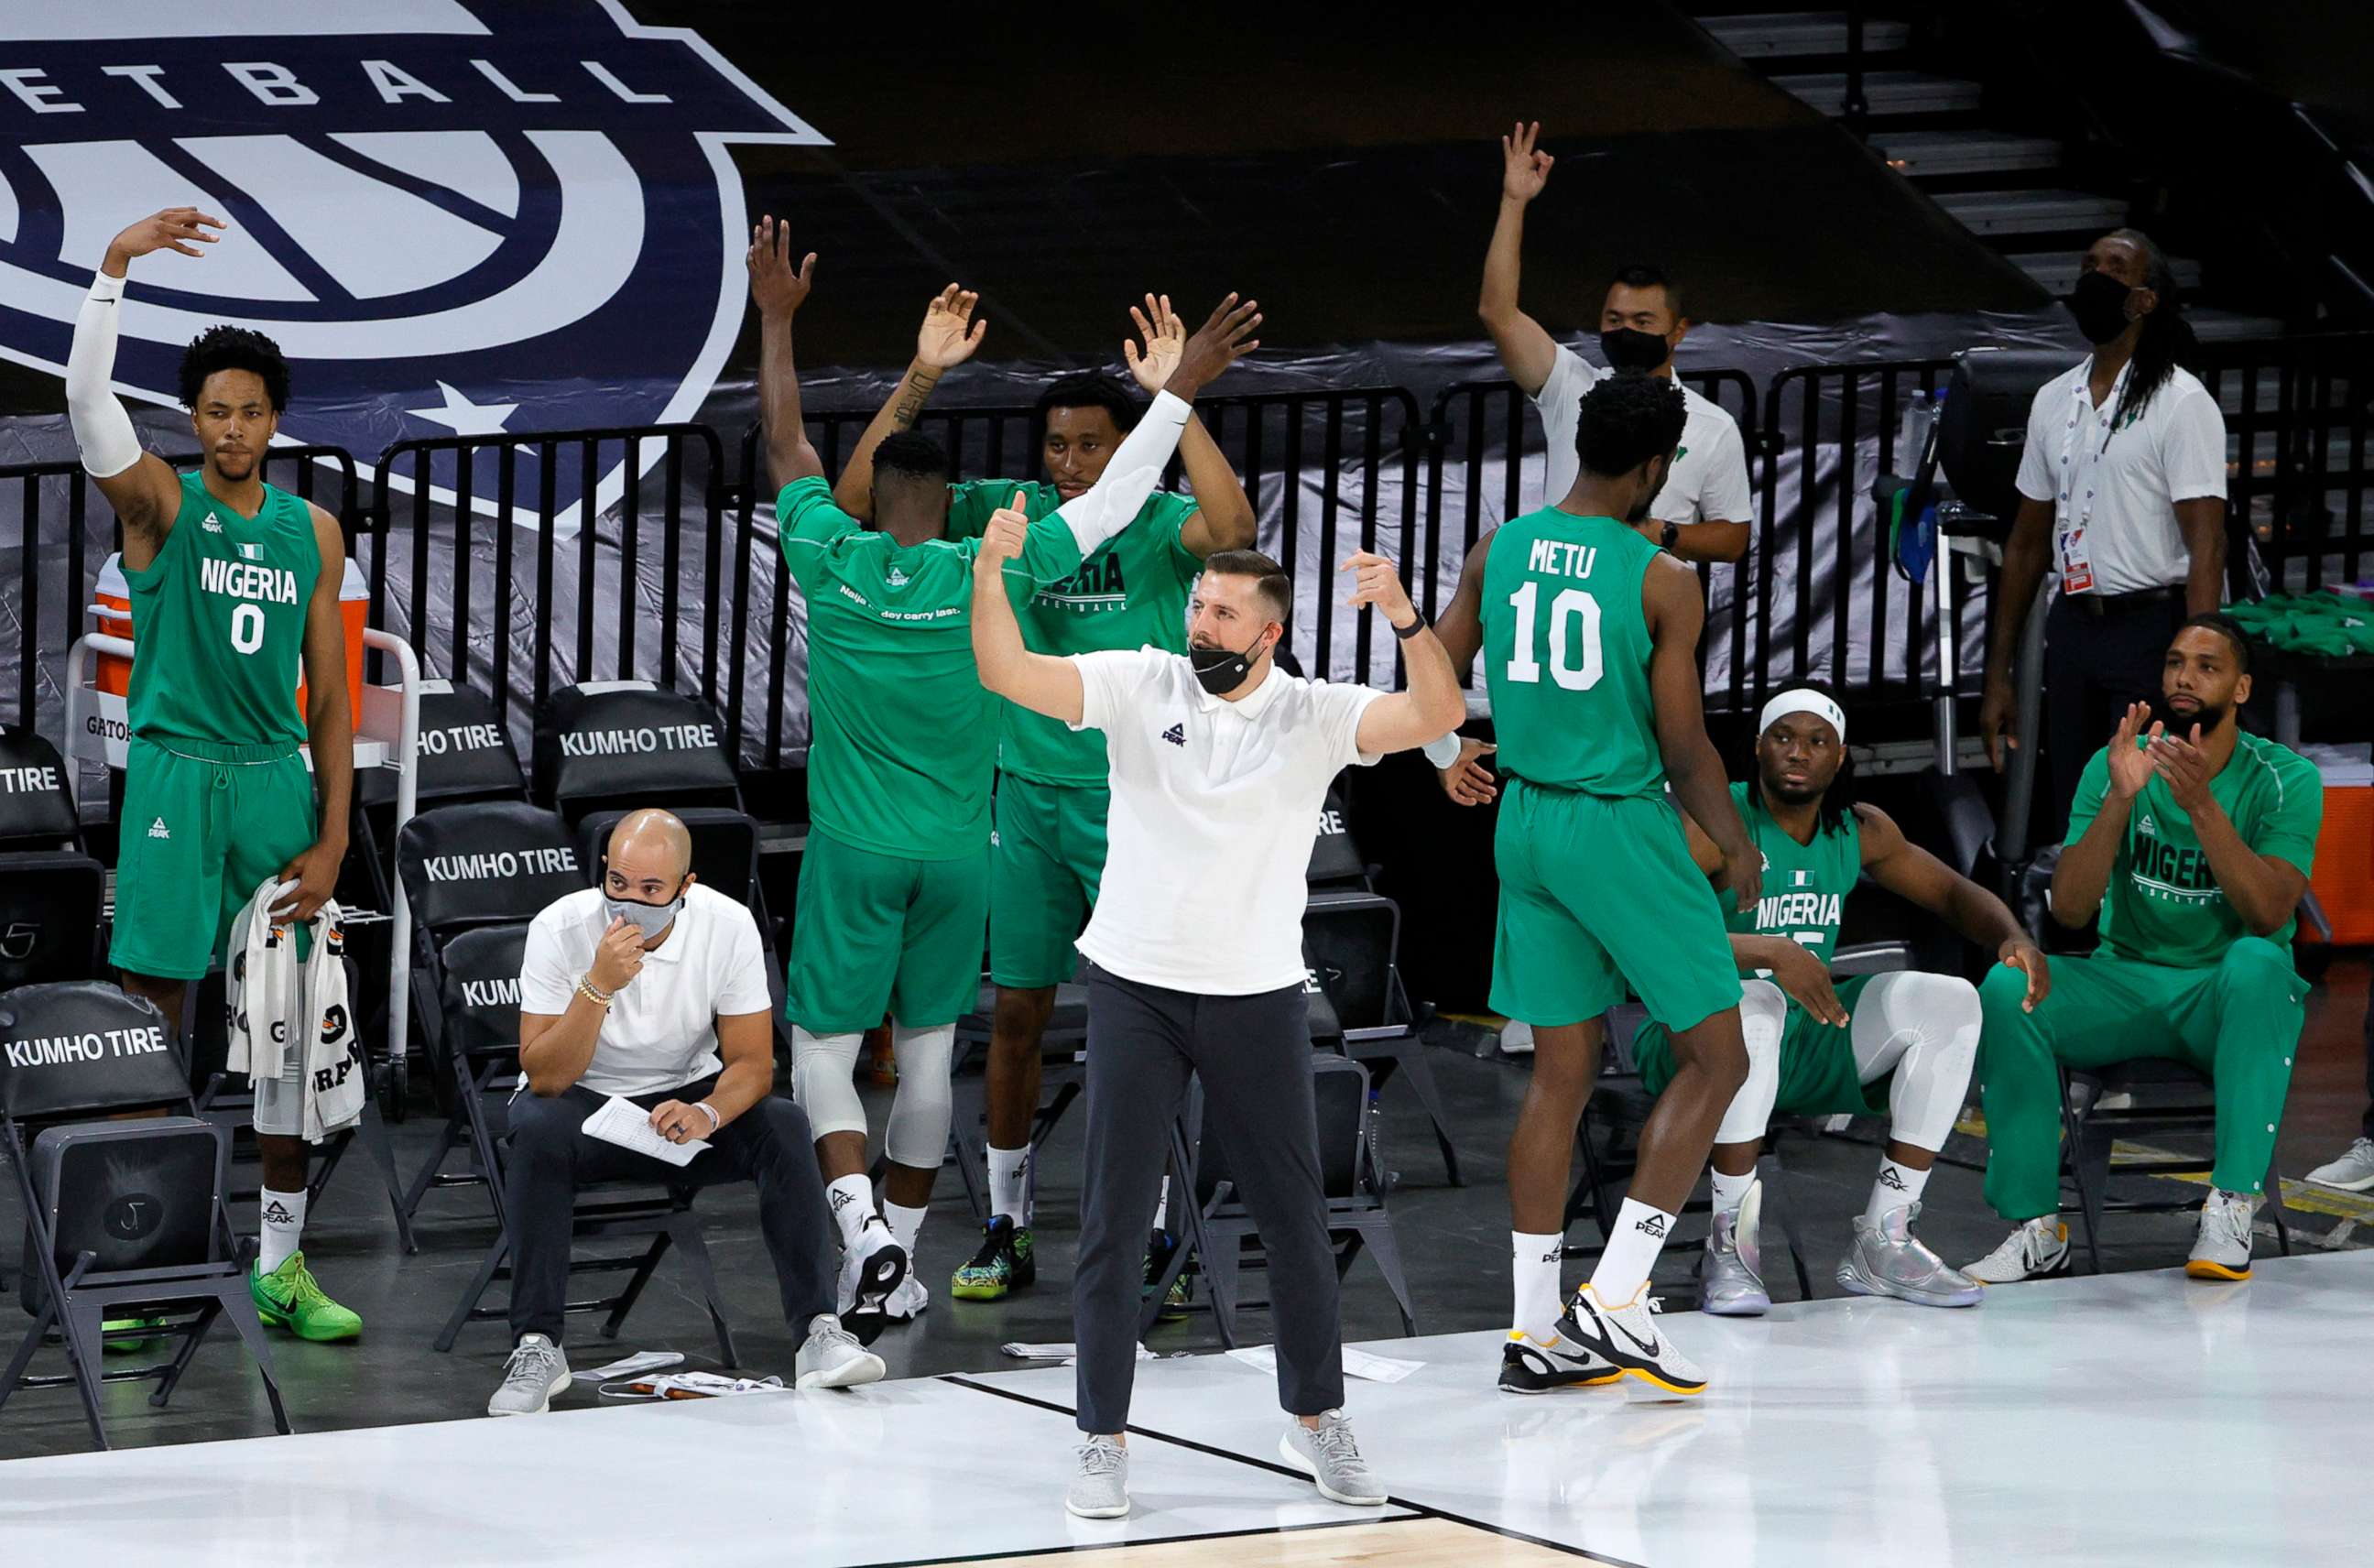 PHOTO: The Nigeria bench reacts after Ike Iroegbu #1 of Nigeria hit a 3-pointer against the United States in the fourth quarter of an exhibition game at Michelob ULTRA Arena ahead of the Tokyo Olympic Games, July 10, 2021, in Las Vegas.